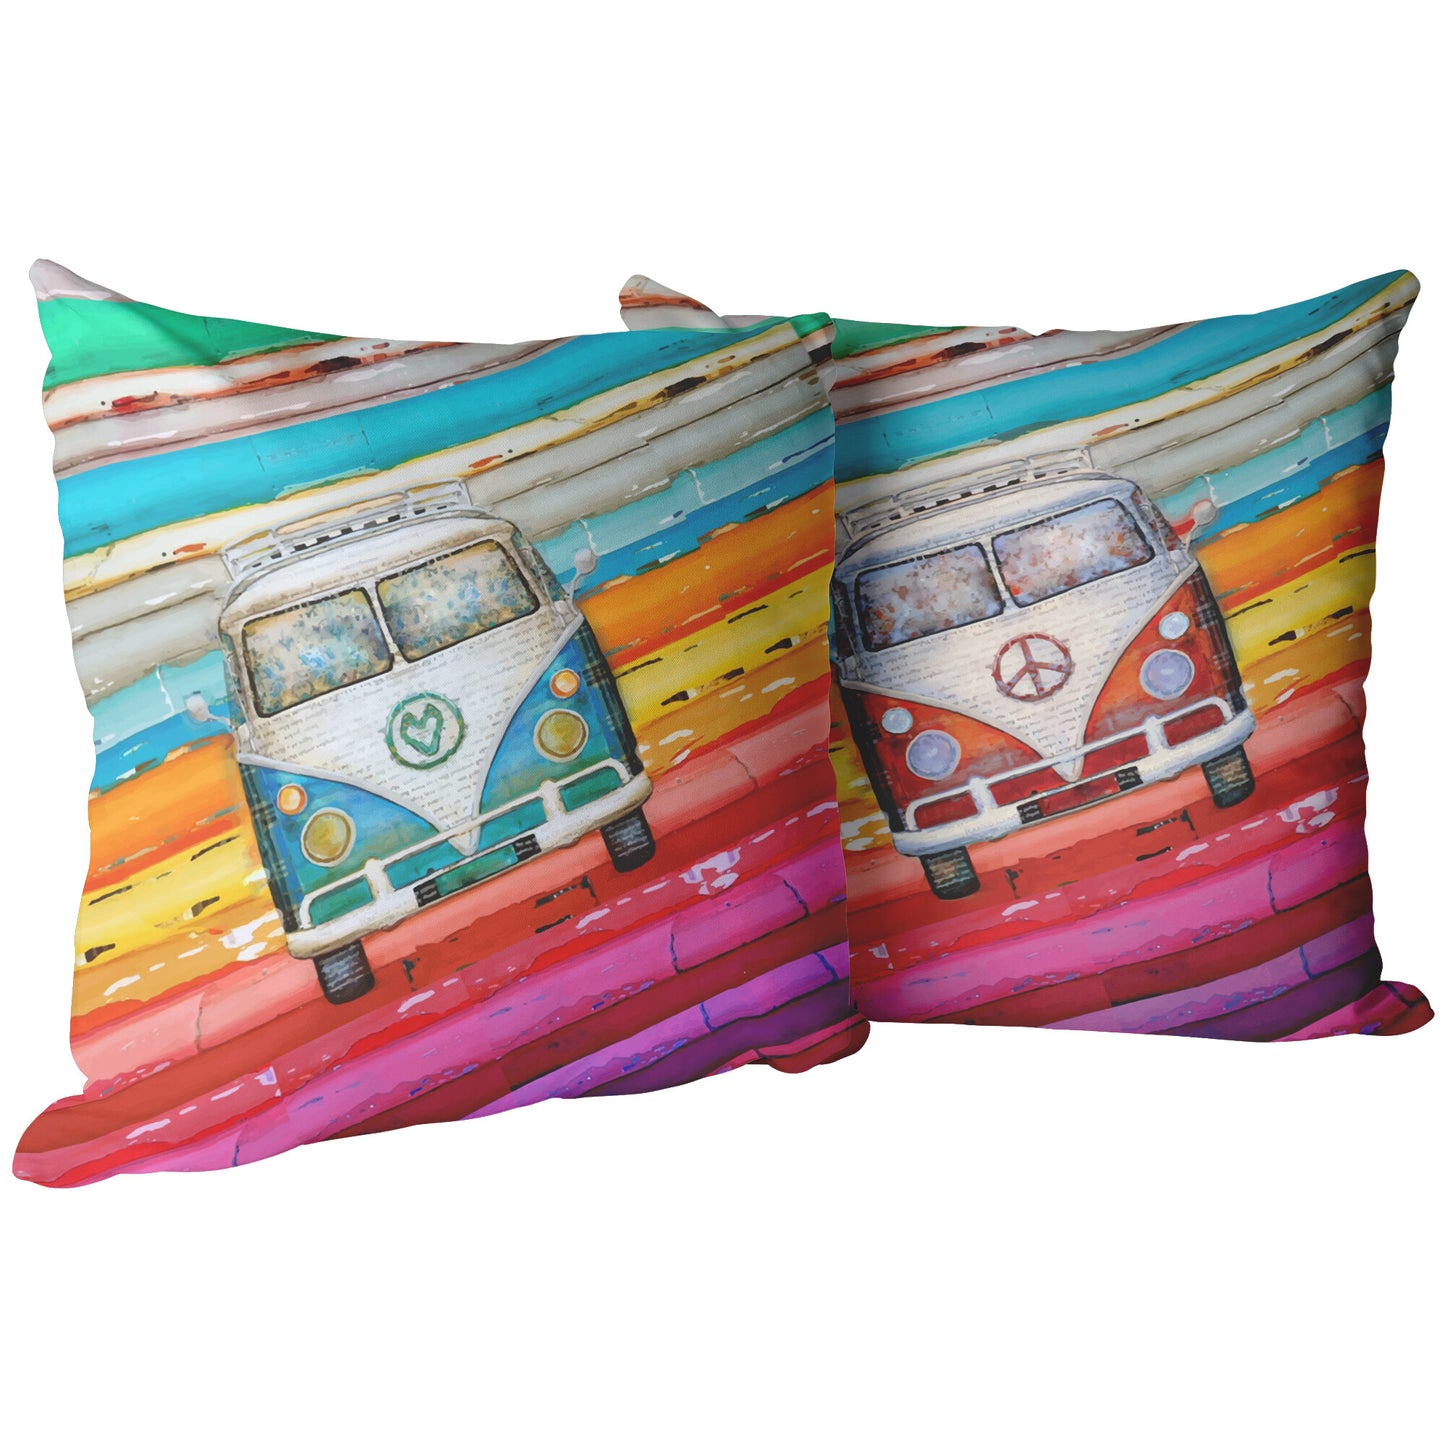 Groovy Hippie Van Pillows And Covers